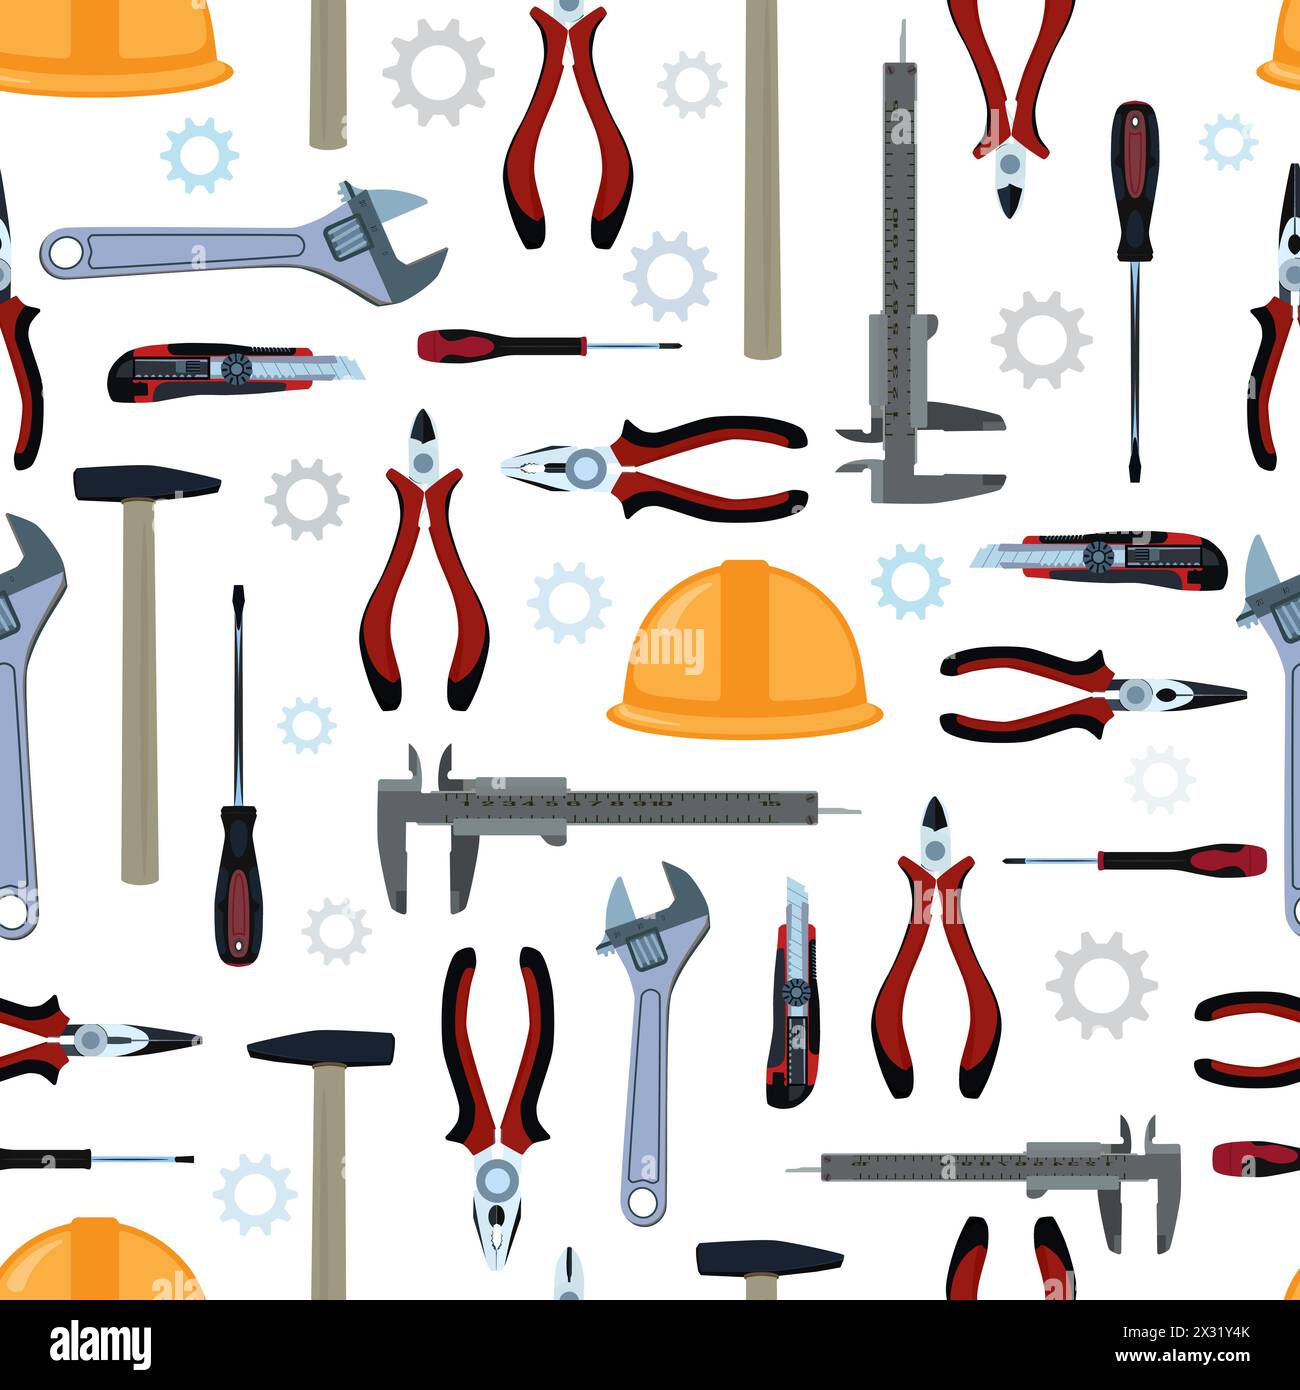 Work tools vector seamless pattern. Hammer, hard hat, pliers, wrench, screwdrivers, cutter knife and vernier caliper. Electrician, repairman, construc Stock Vector